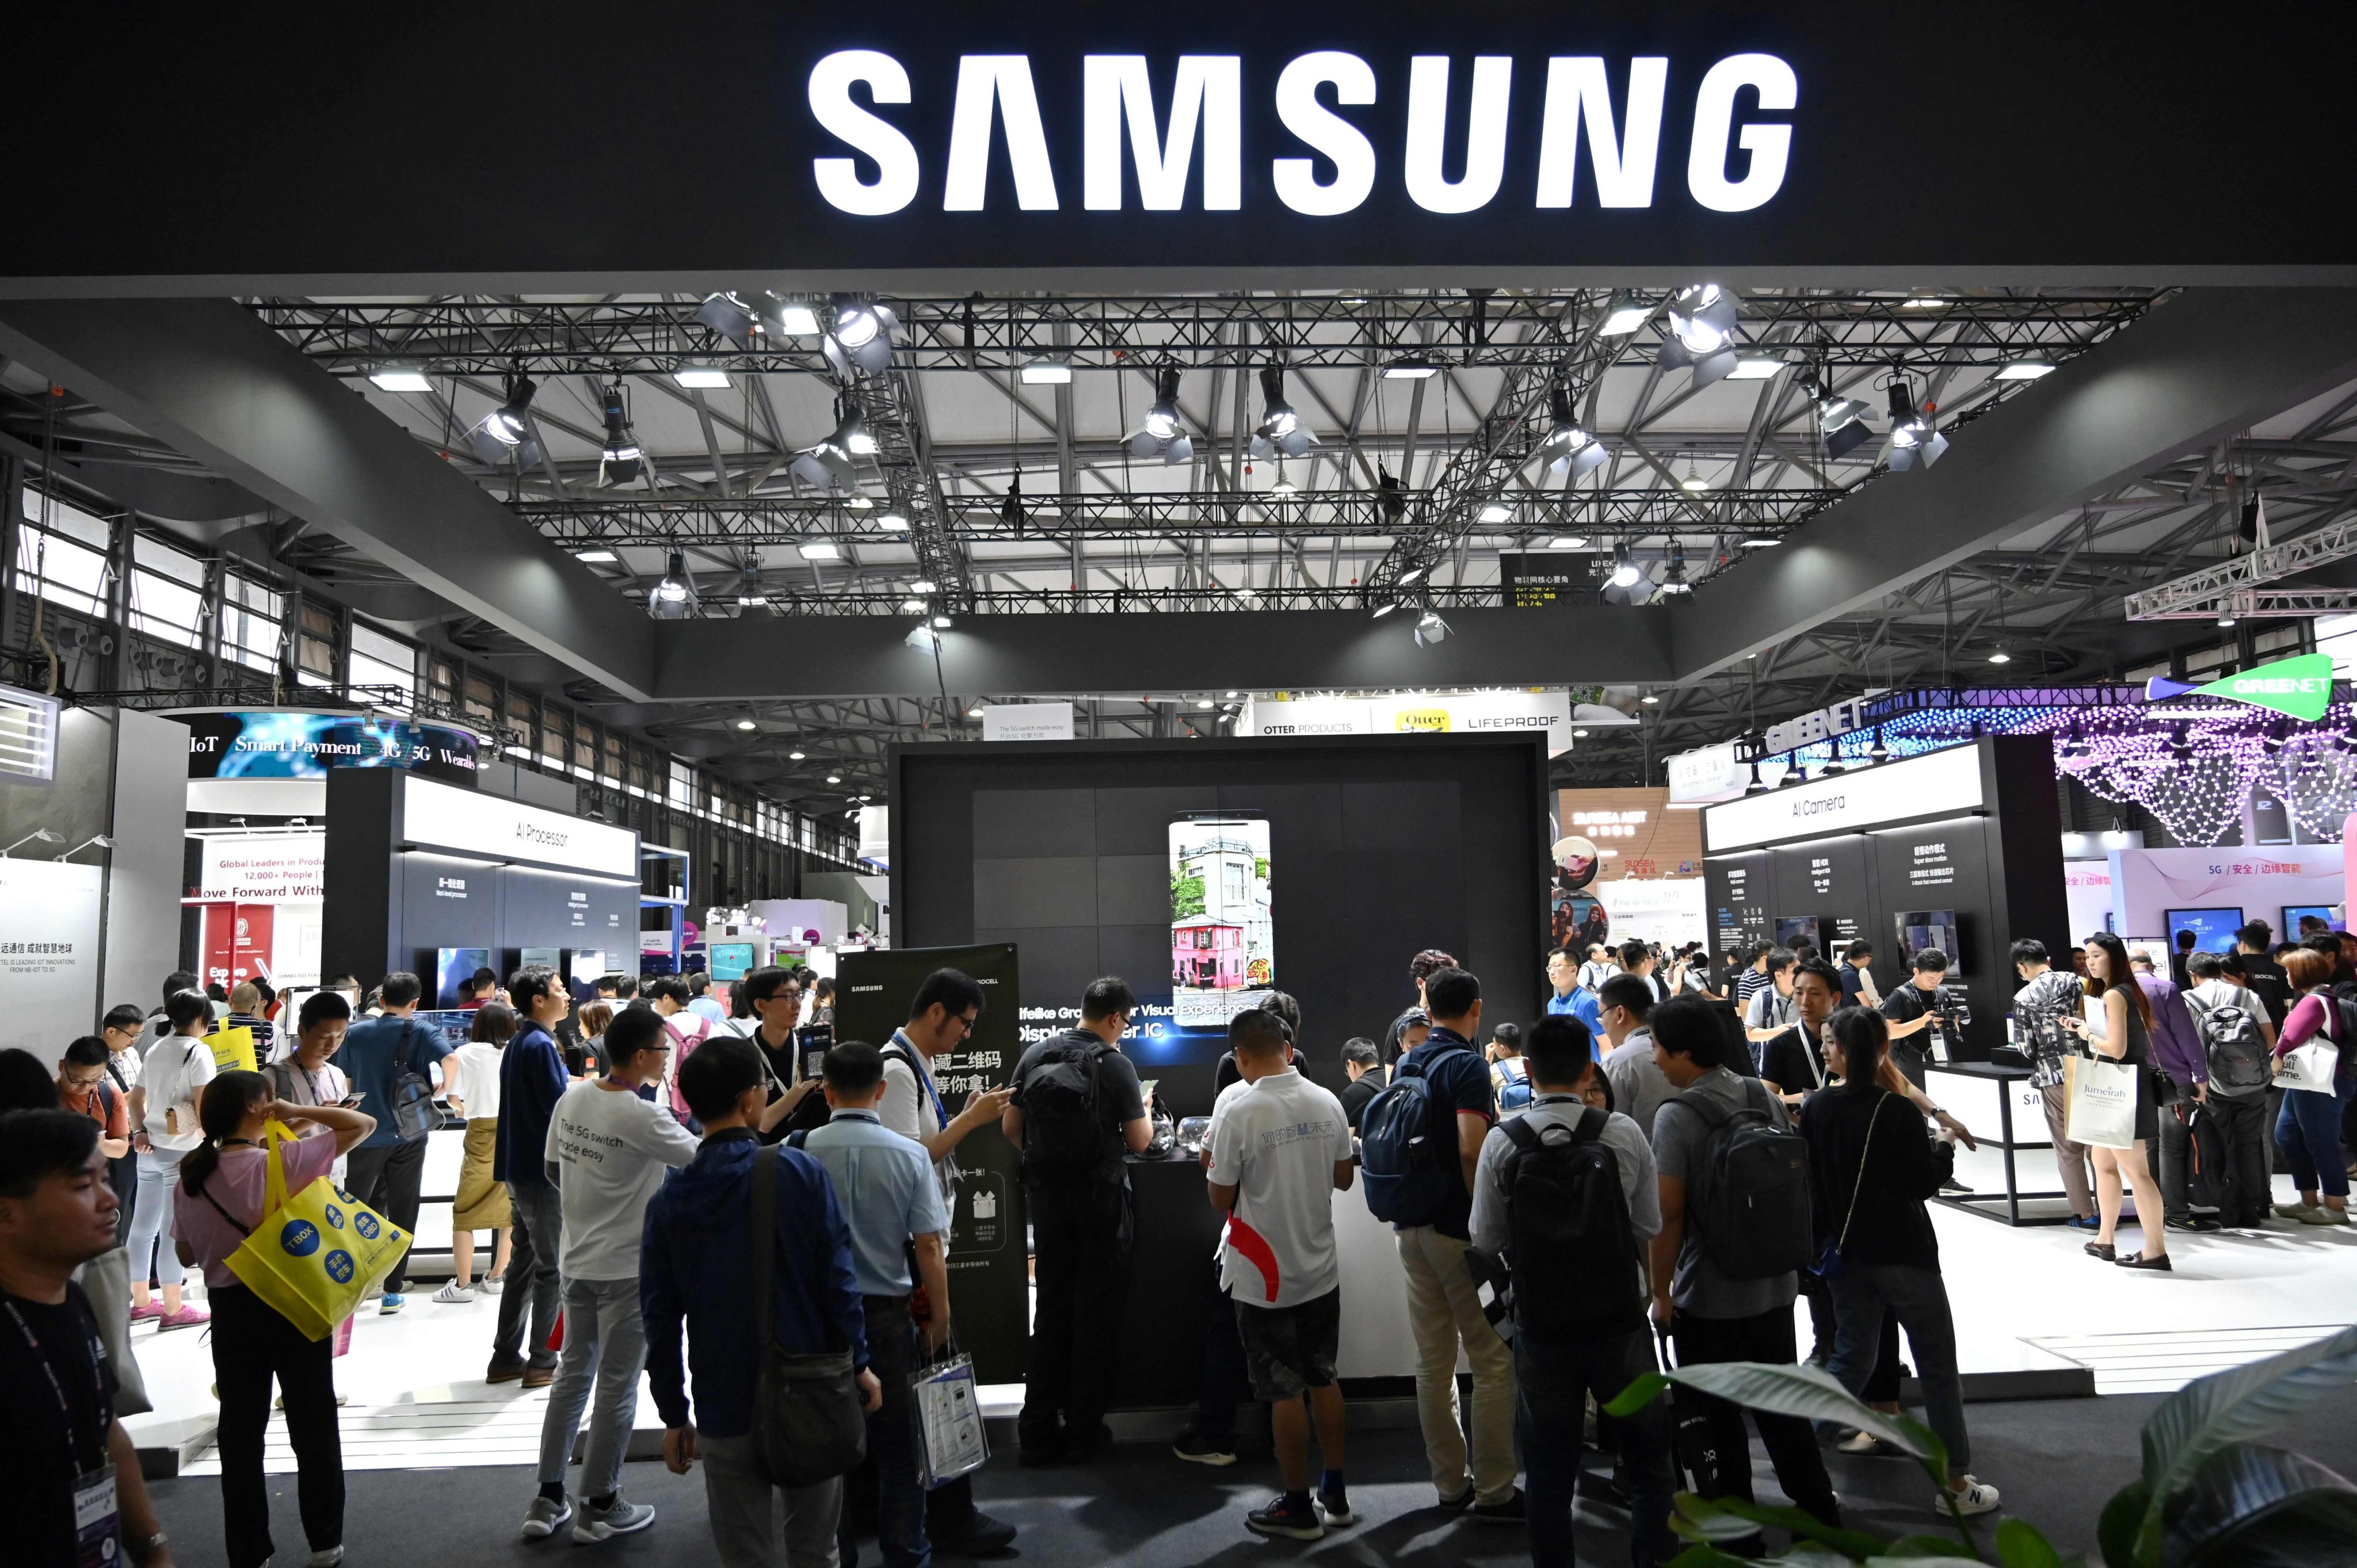 People are seen visiting the Samsung Electronics exhibition area at MWC Shanghai on June 16, 2019. The world’s largest smartphone vendor had been a major exhibitor and corporate sponsor at the annual trade show over the past several years. Photo: Agence France-Presse